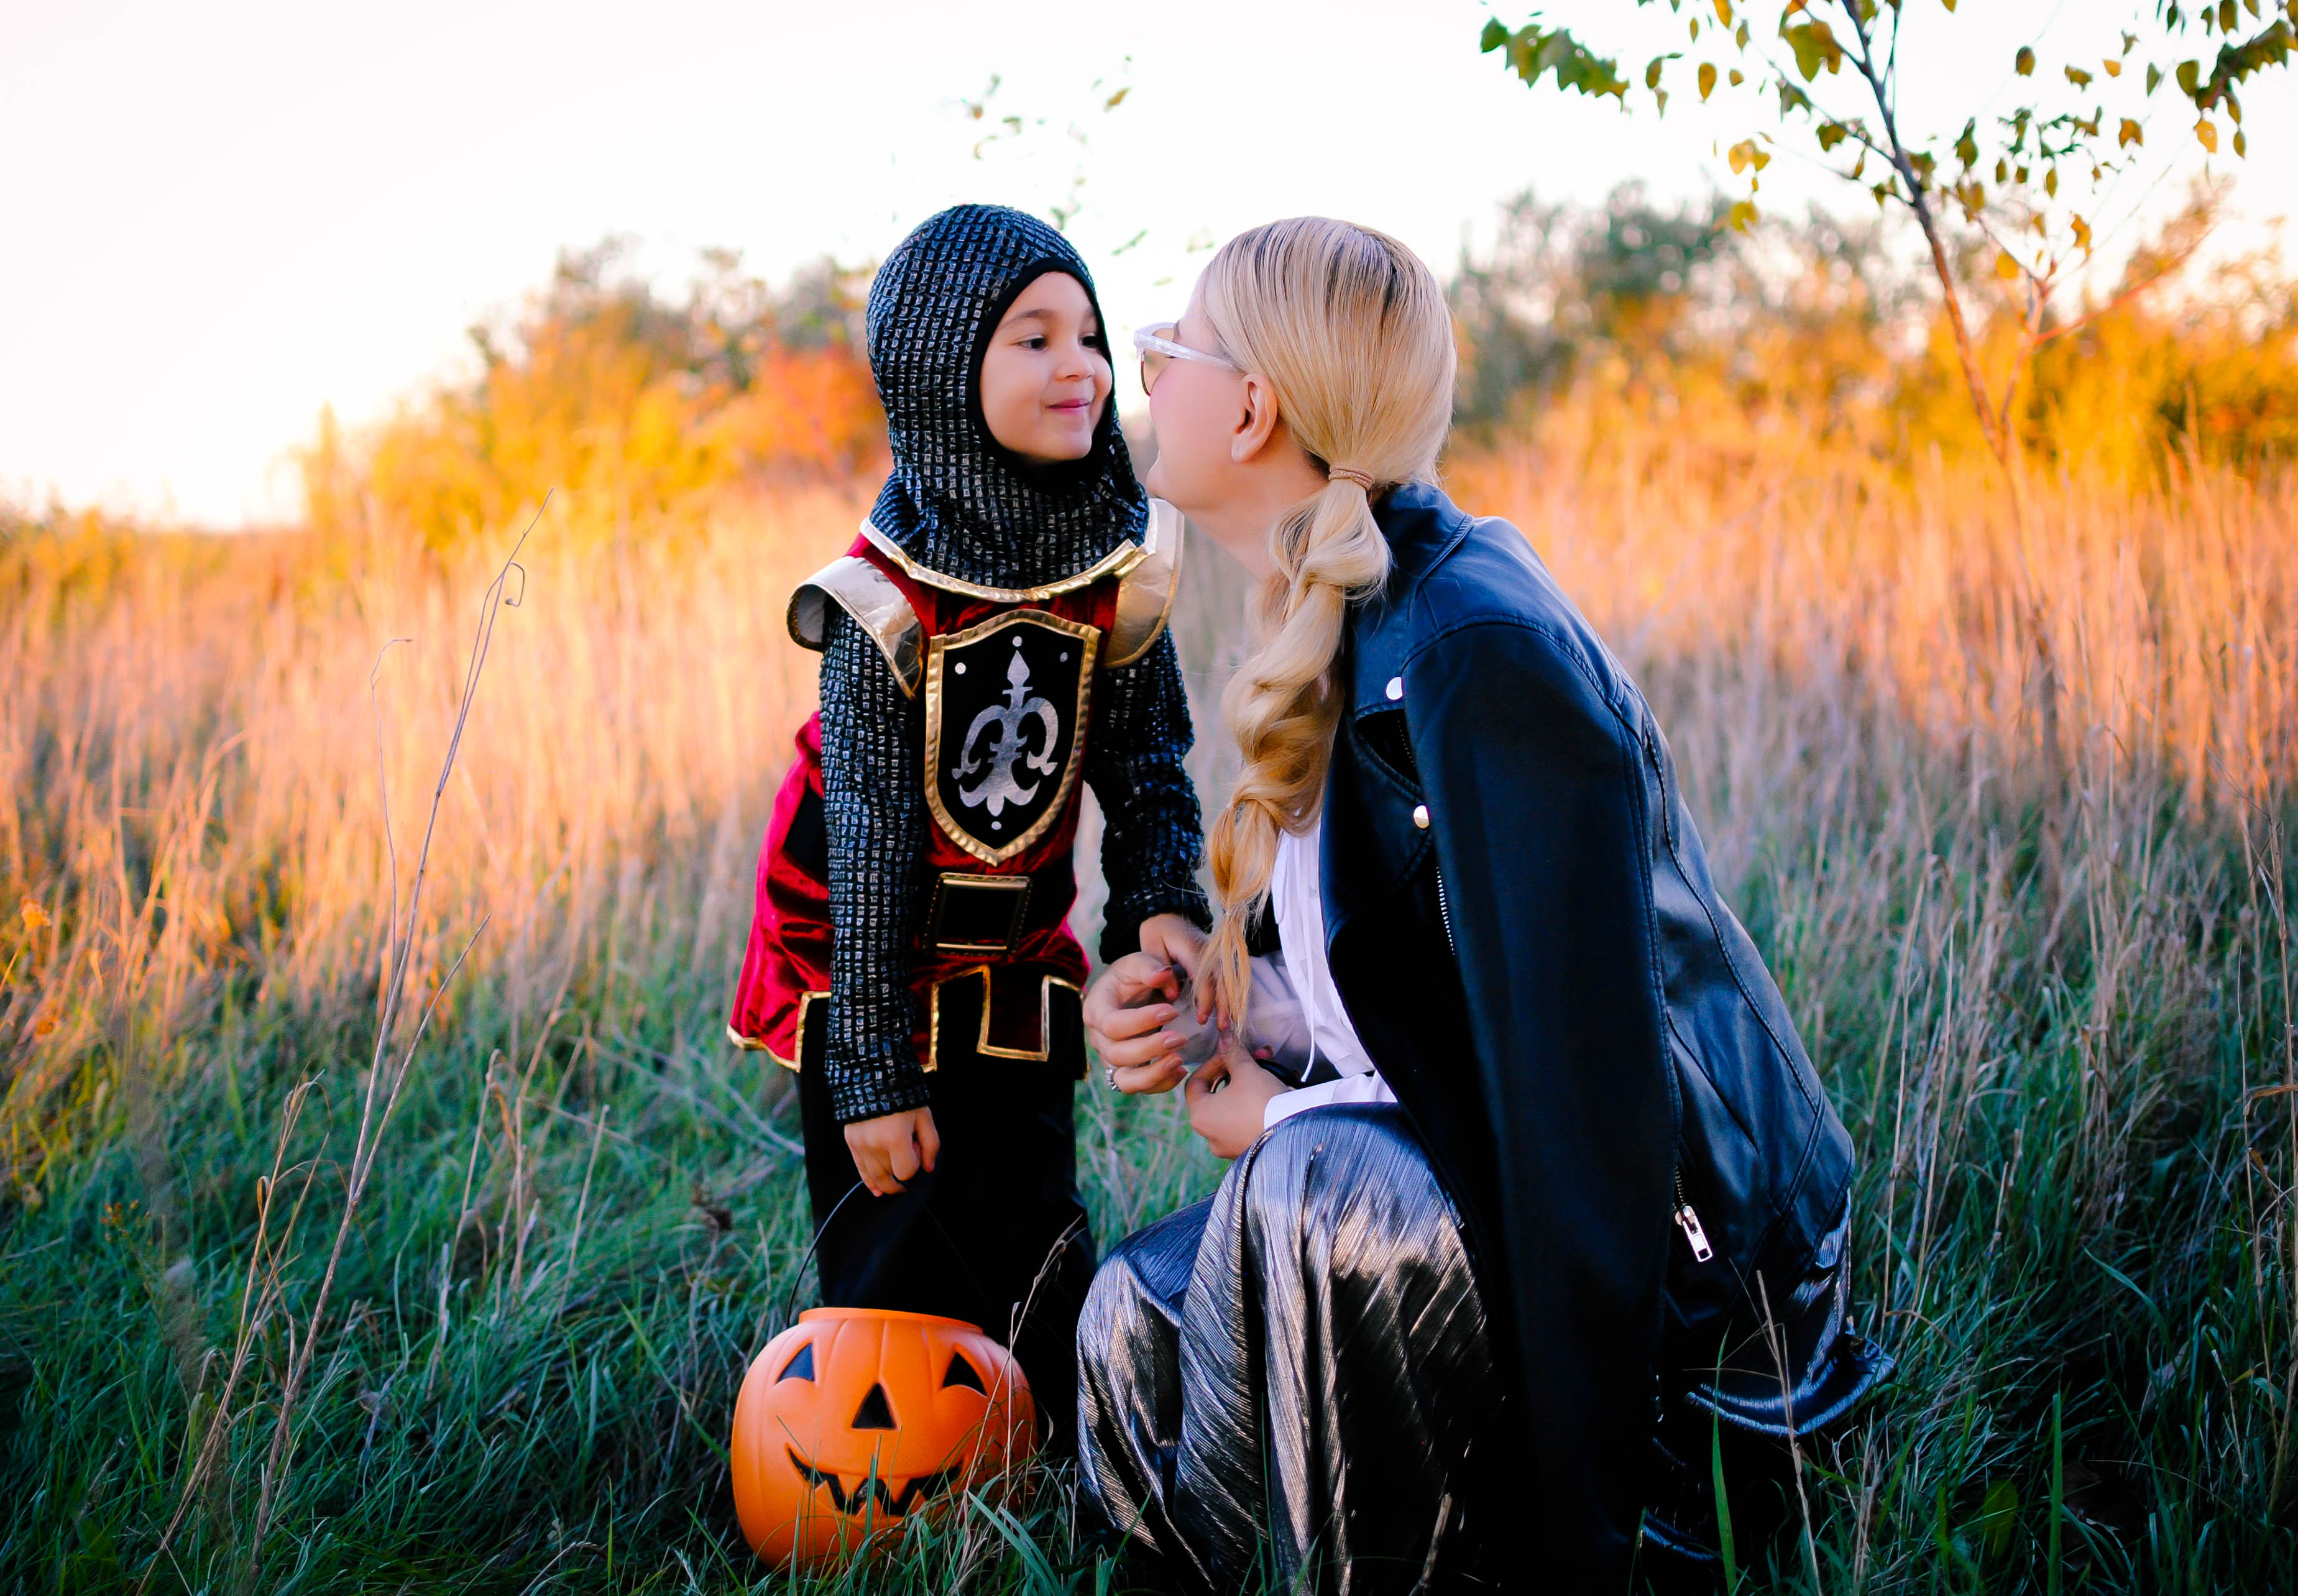 vanessa-lambert-blogger-behind-what-would-v-wear-takes-her-son-kingston-trick-or-treating-for-halloween_her-son-wears-a-knight-costume-from-marks-and-spencer_12